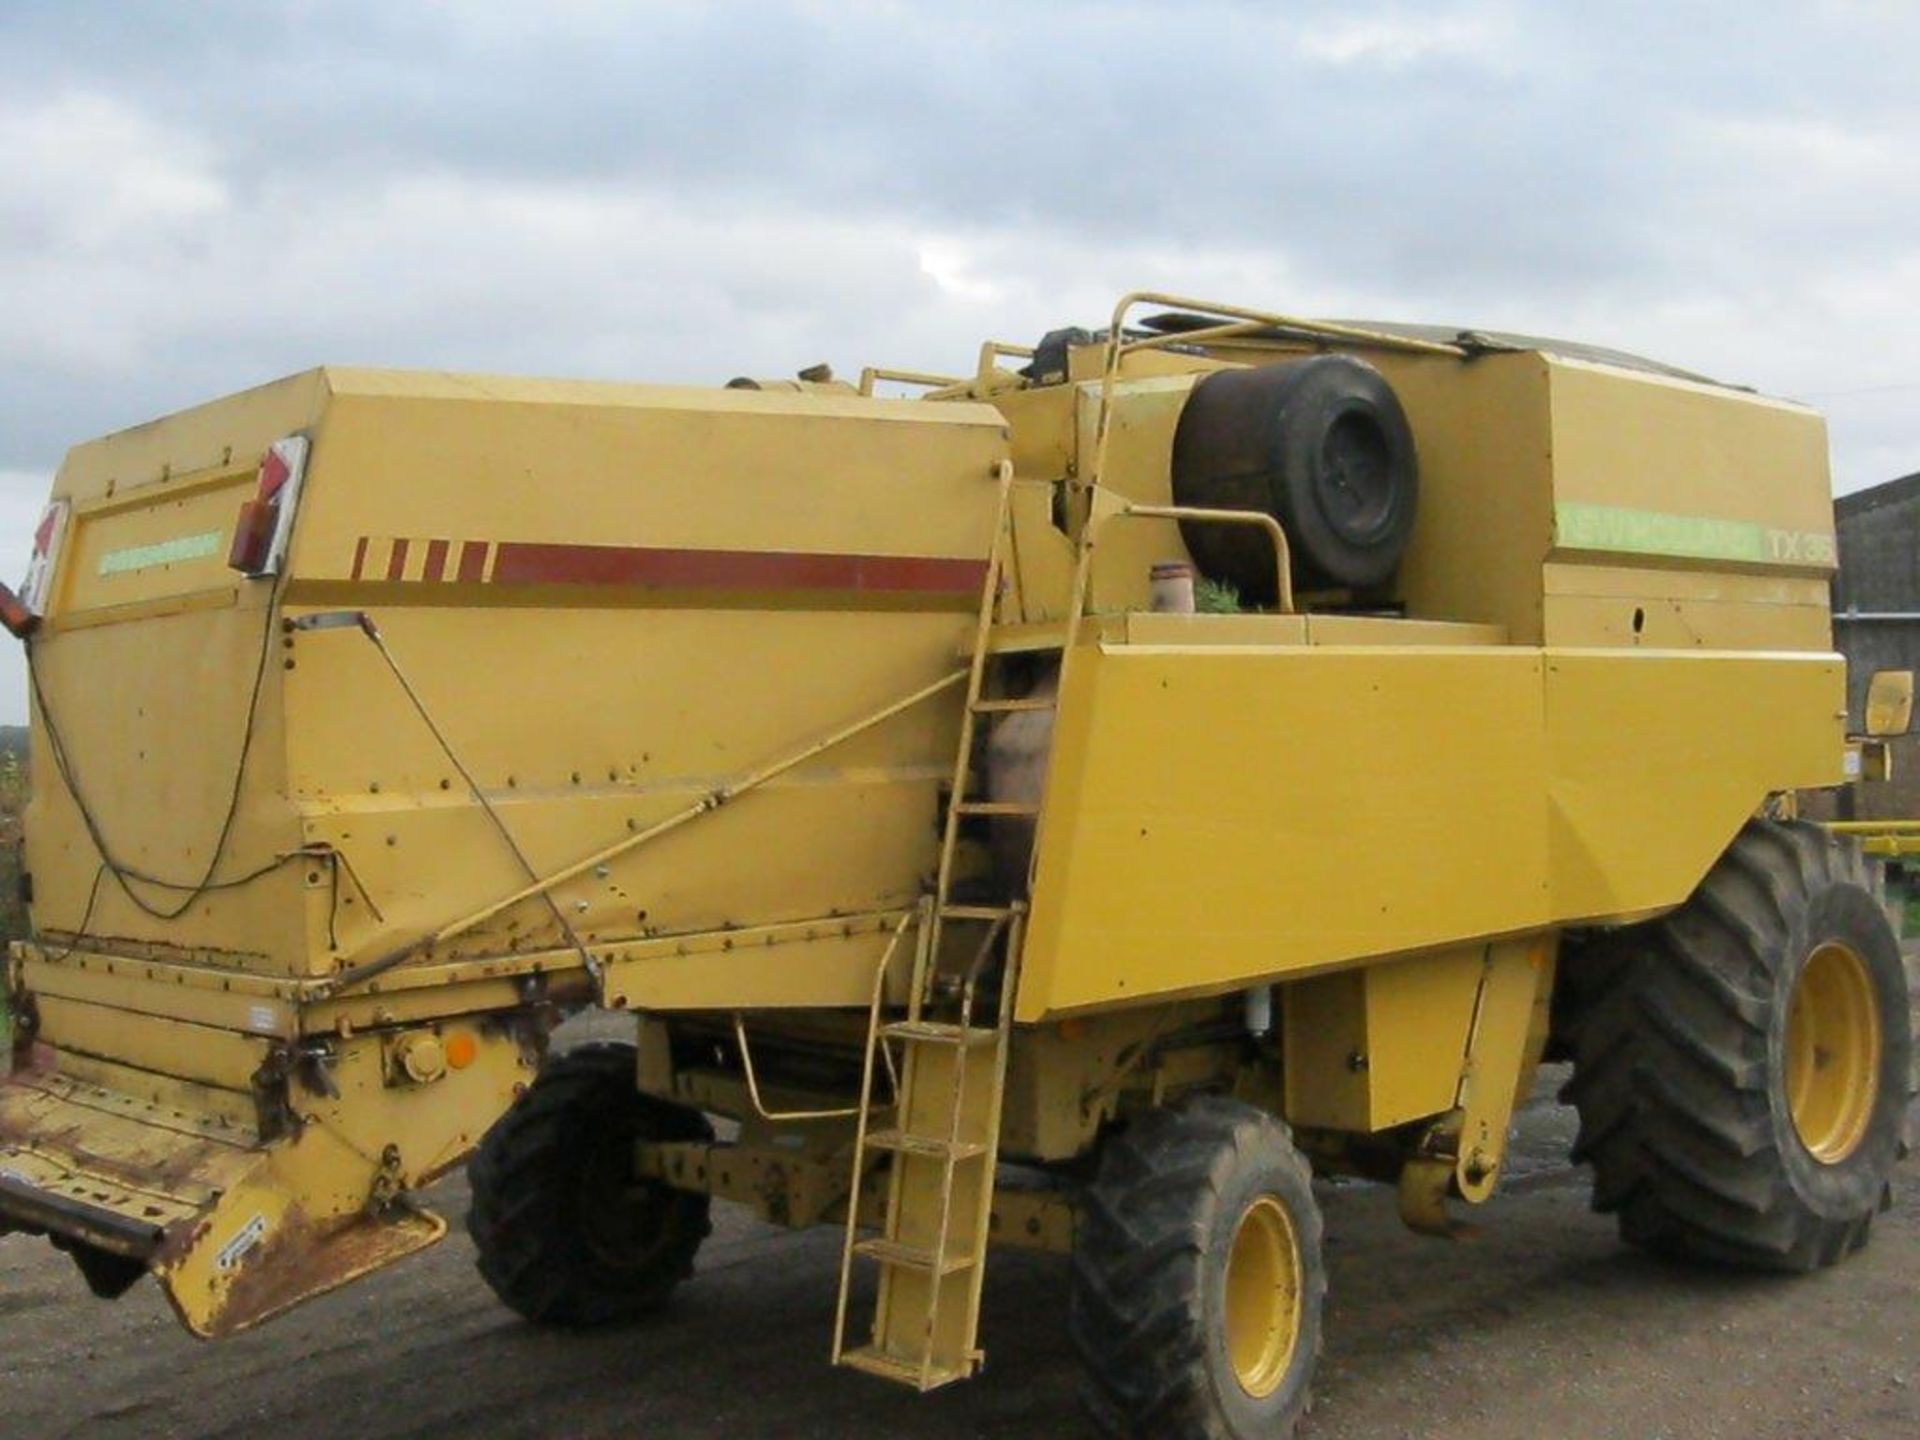 New Holland TX36sl, 1993, 3500 hours, self levelling sieves, hydrostatic drive, straw chopper, - Image 9 of 10